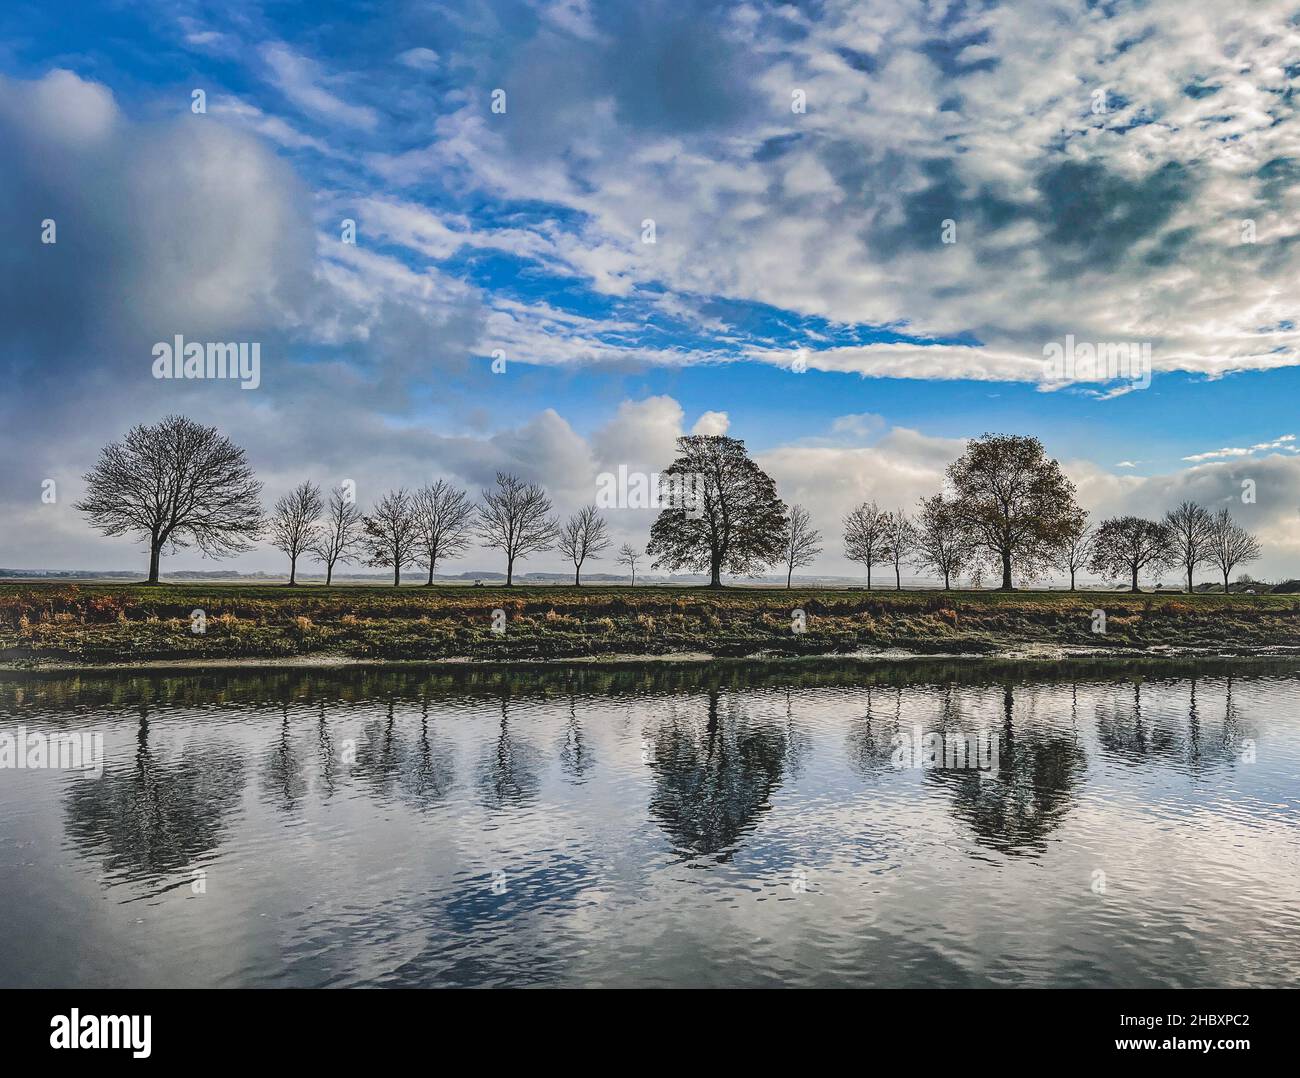 Trees and cloudscape on water reflection, Saint-Valery sur Somme, France Stock Photo